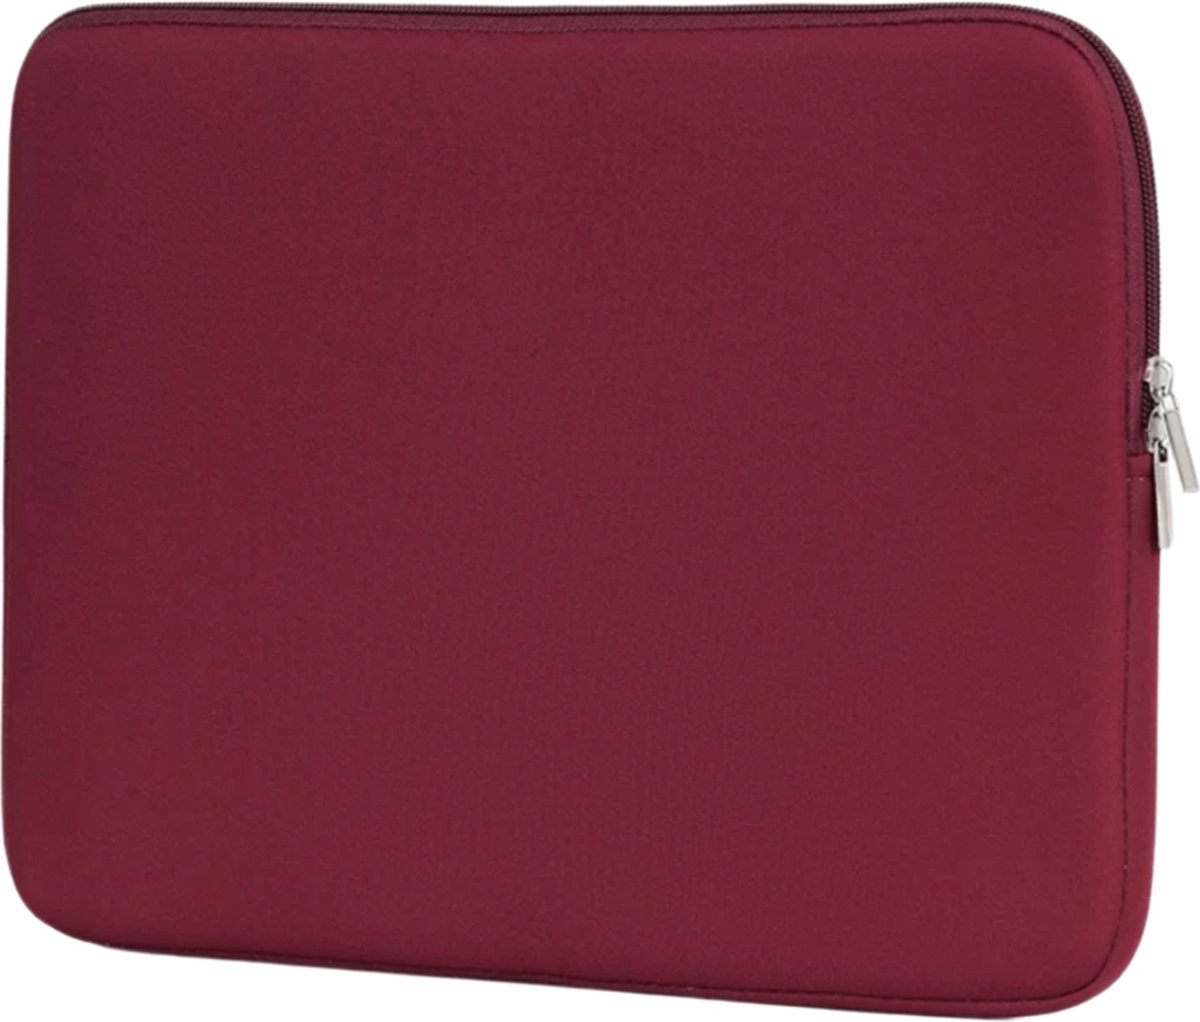 Sleeve - extra bescherming – soft touch – 15,6 inch – laptopcase/tas- bordeaux rood - Dubbele Ritssluiting